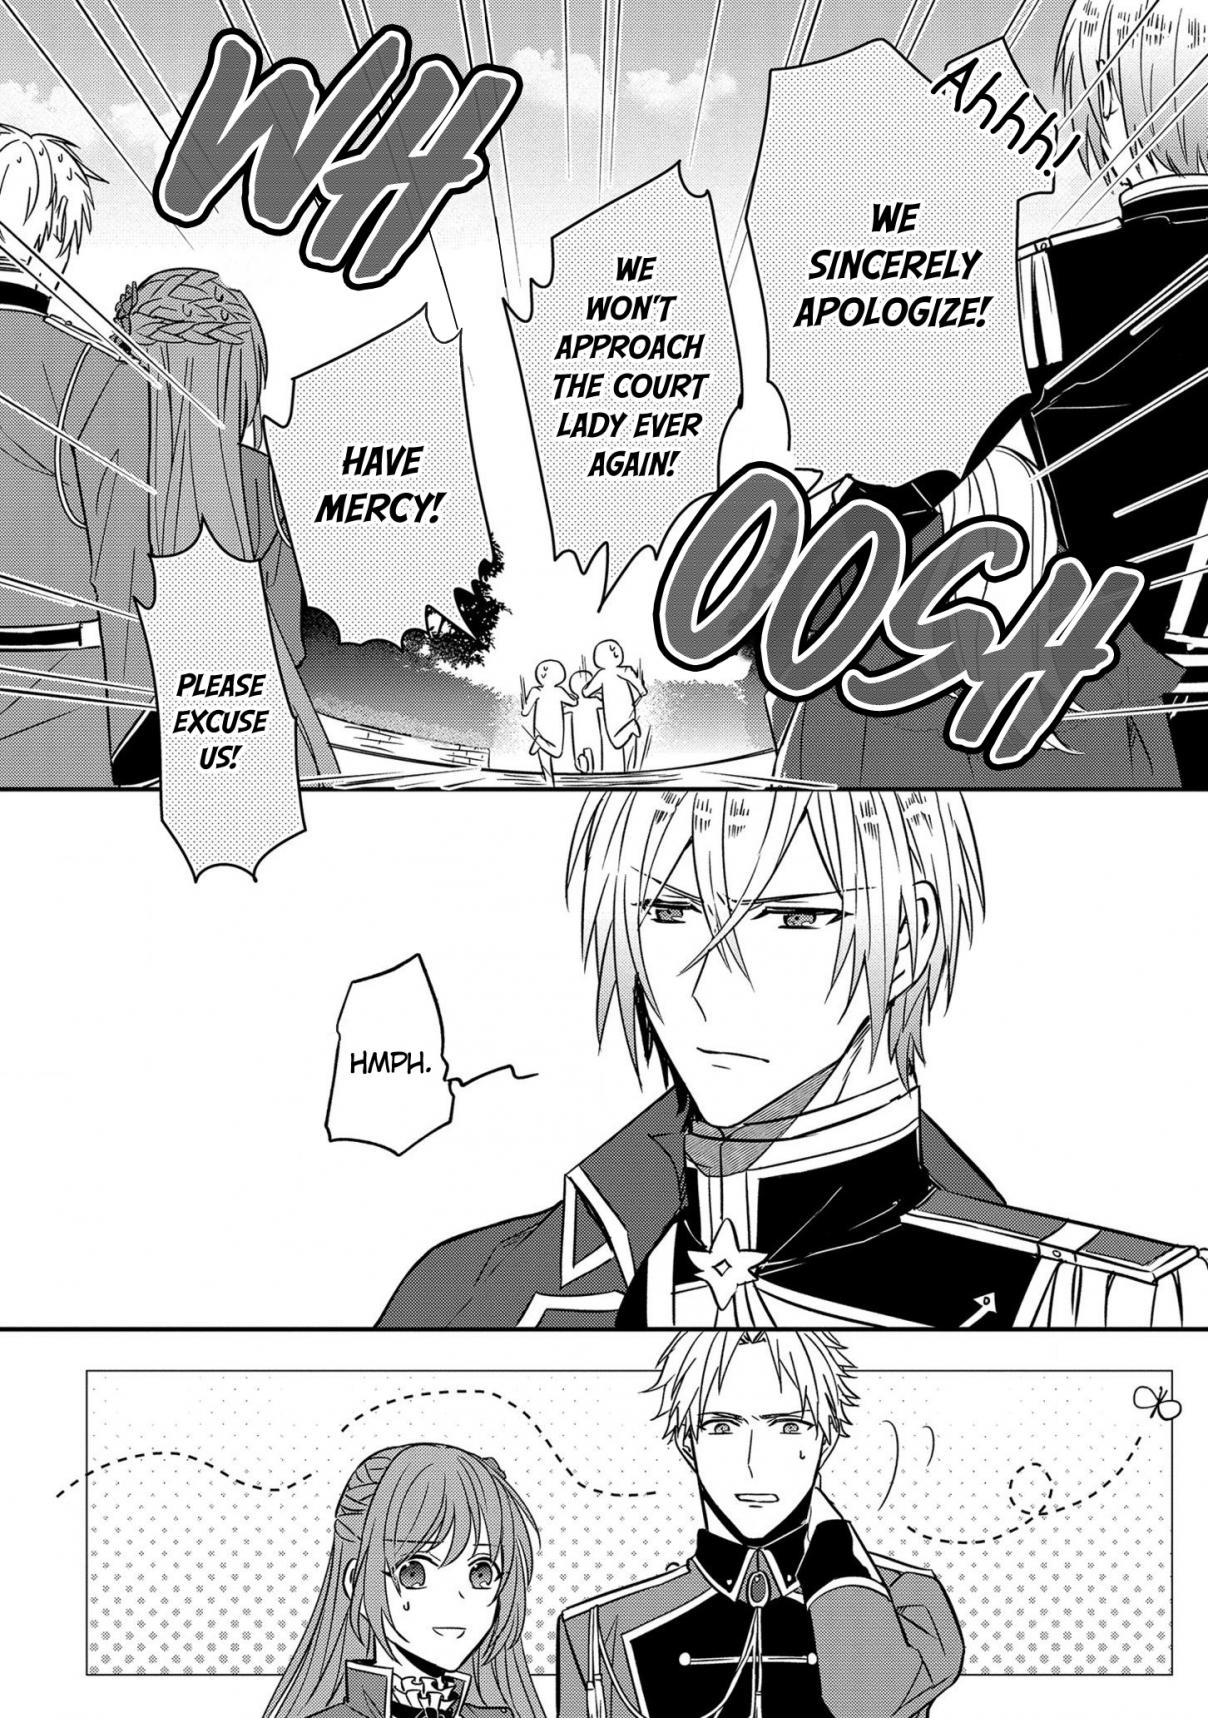 The Emperor's Court Lady is Wanted as a Bride Ch. 5